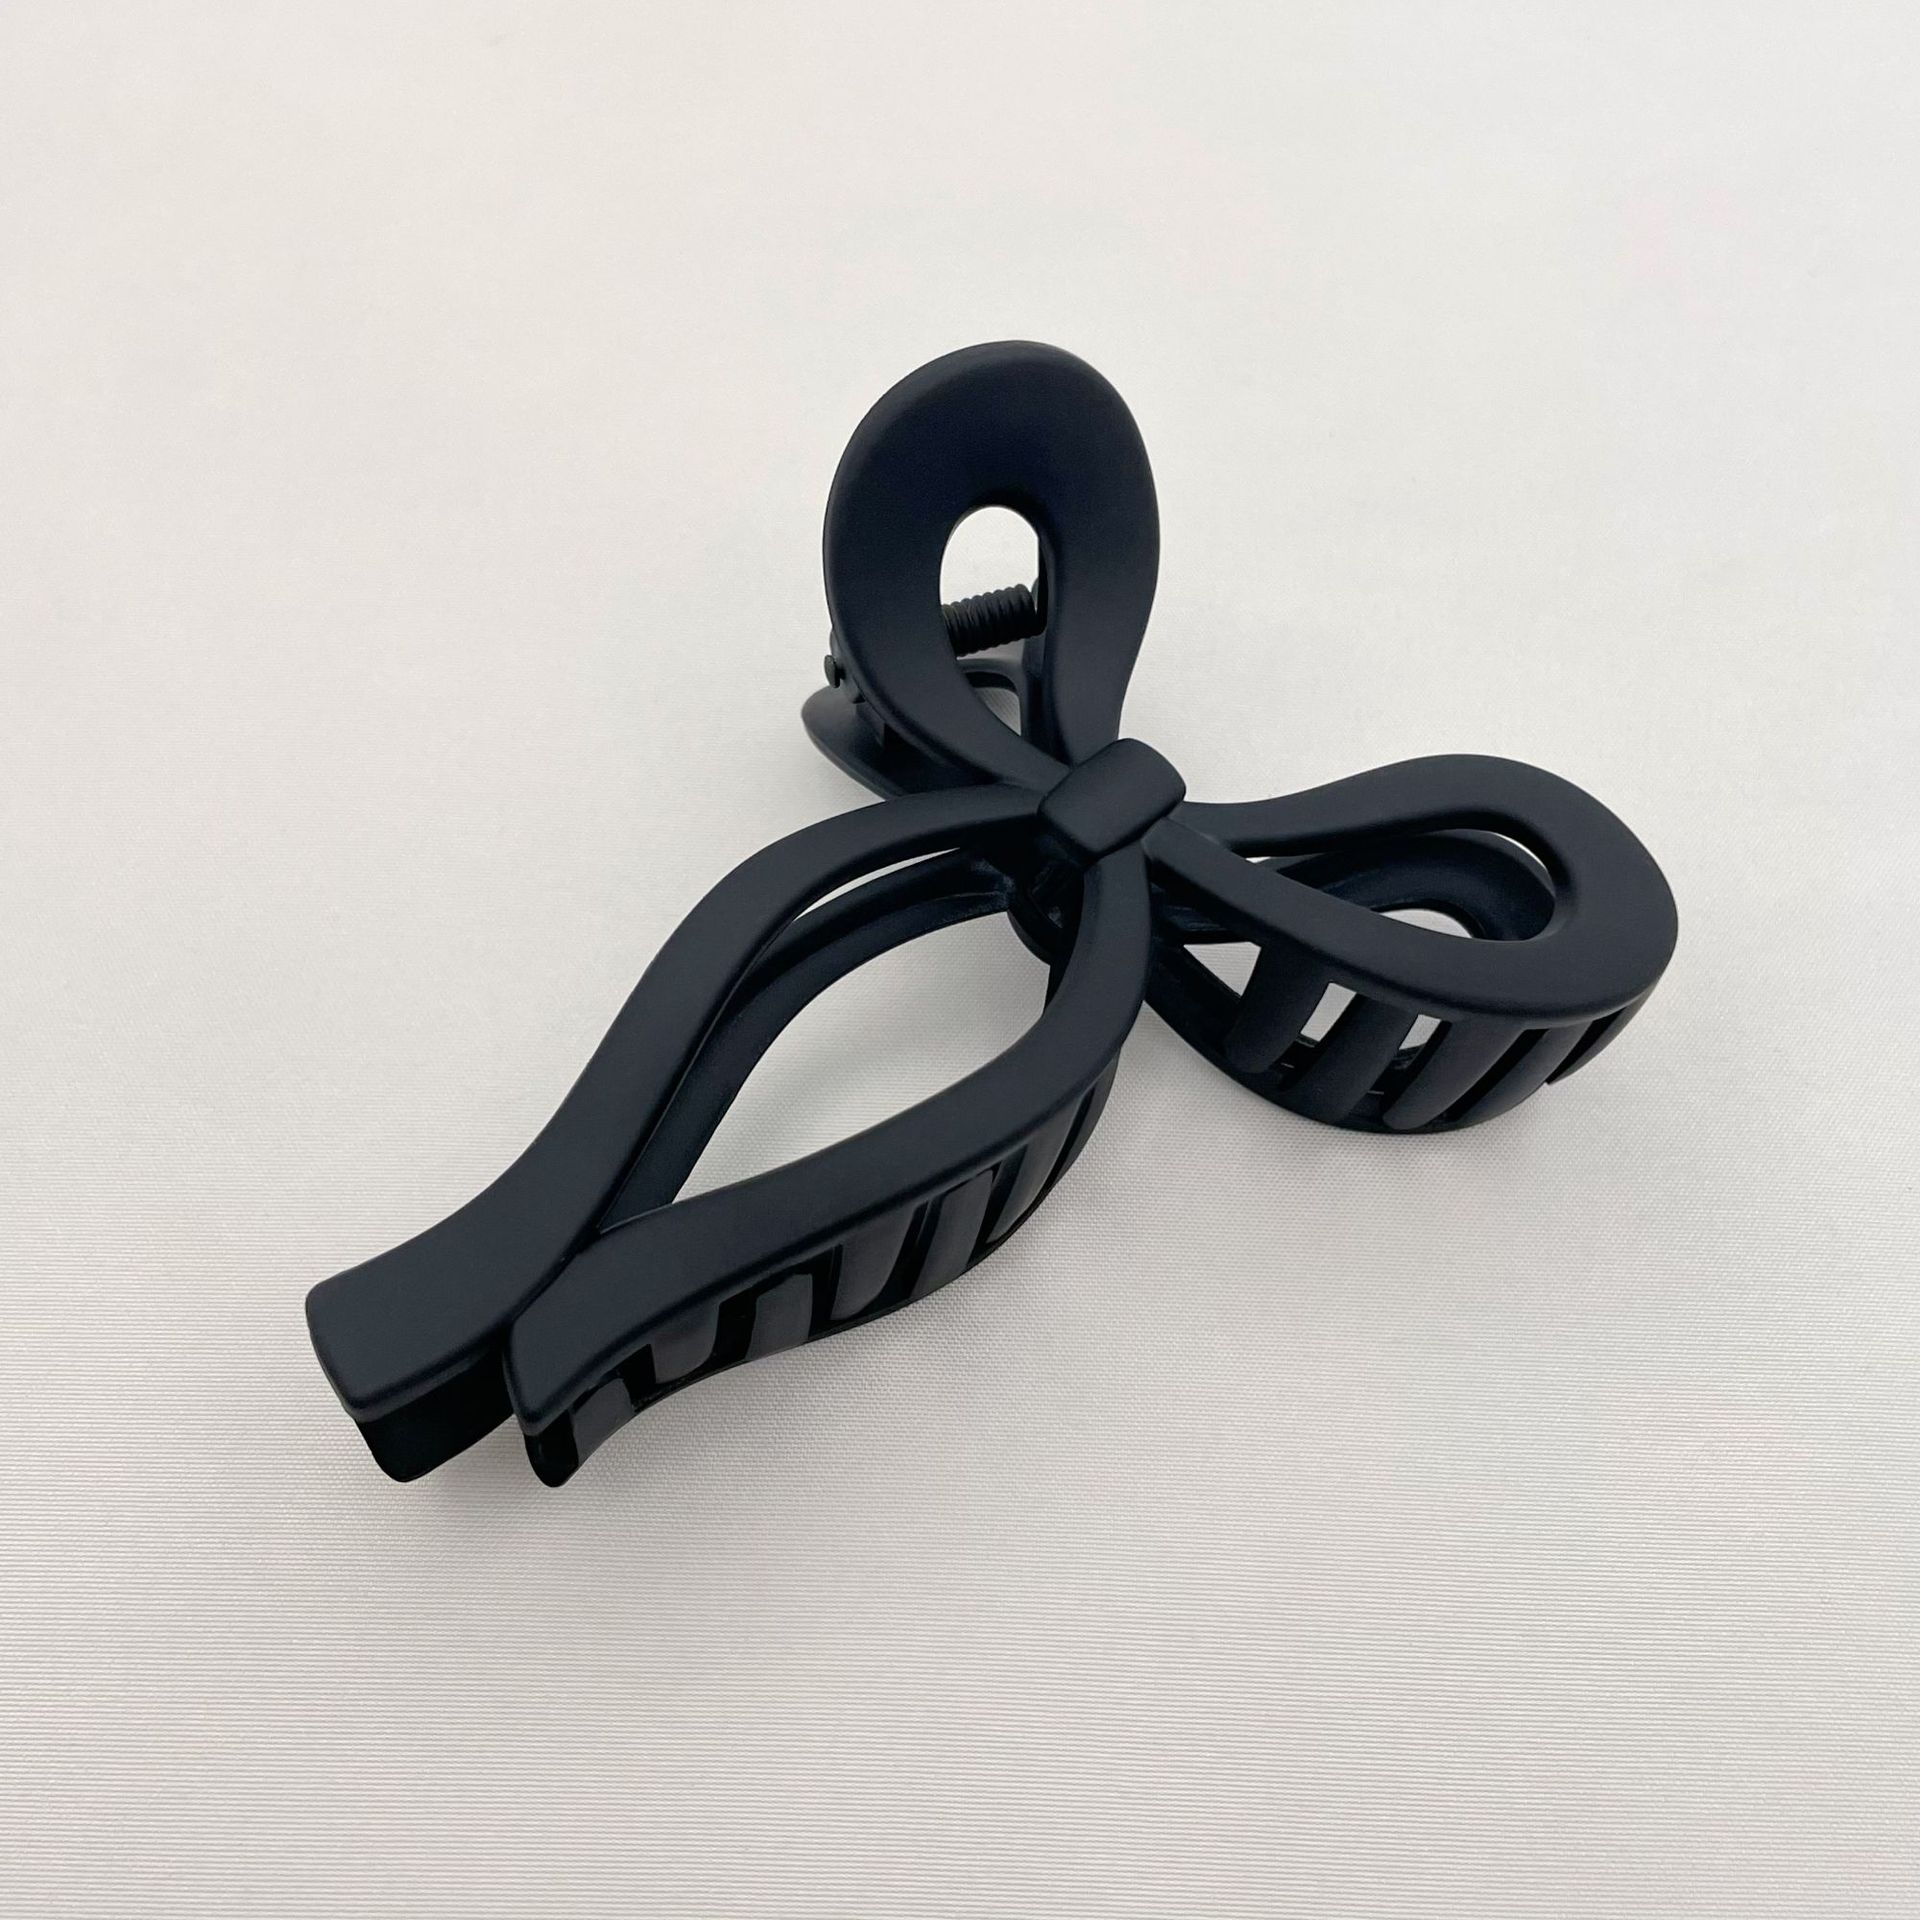 Frosted Texture Grip Rubber Paint Ribbon Shark Clip Back Head High Ponytail Hairpin Hair Accessories Wholesale